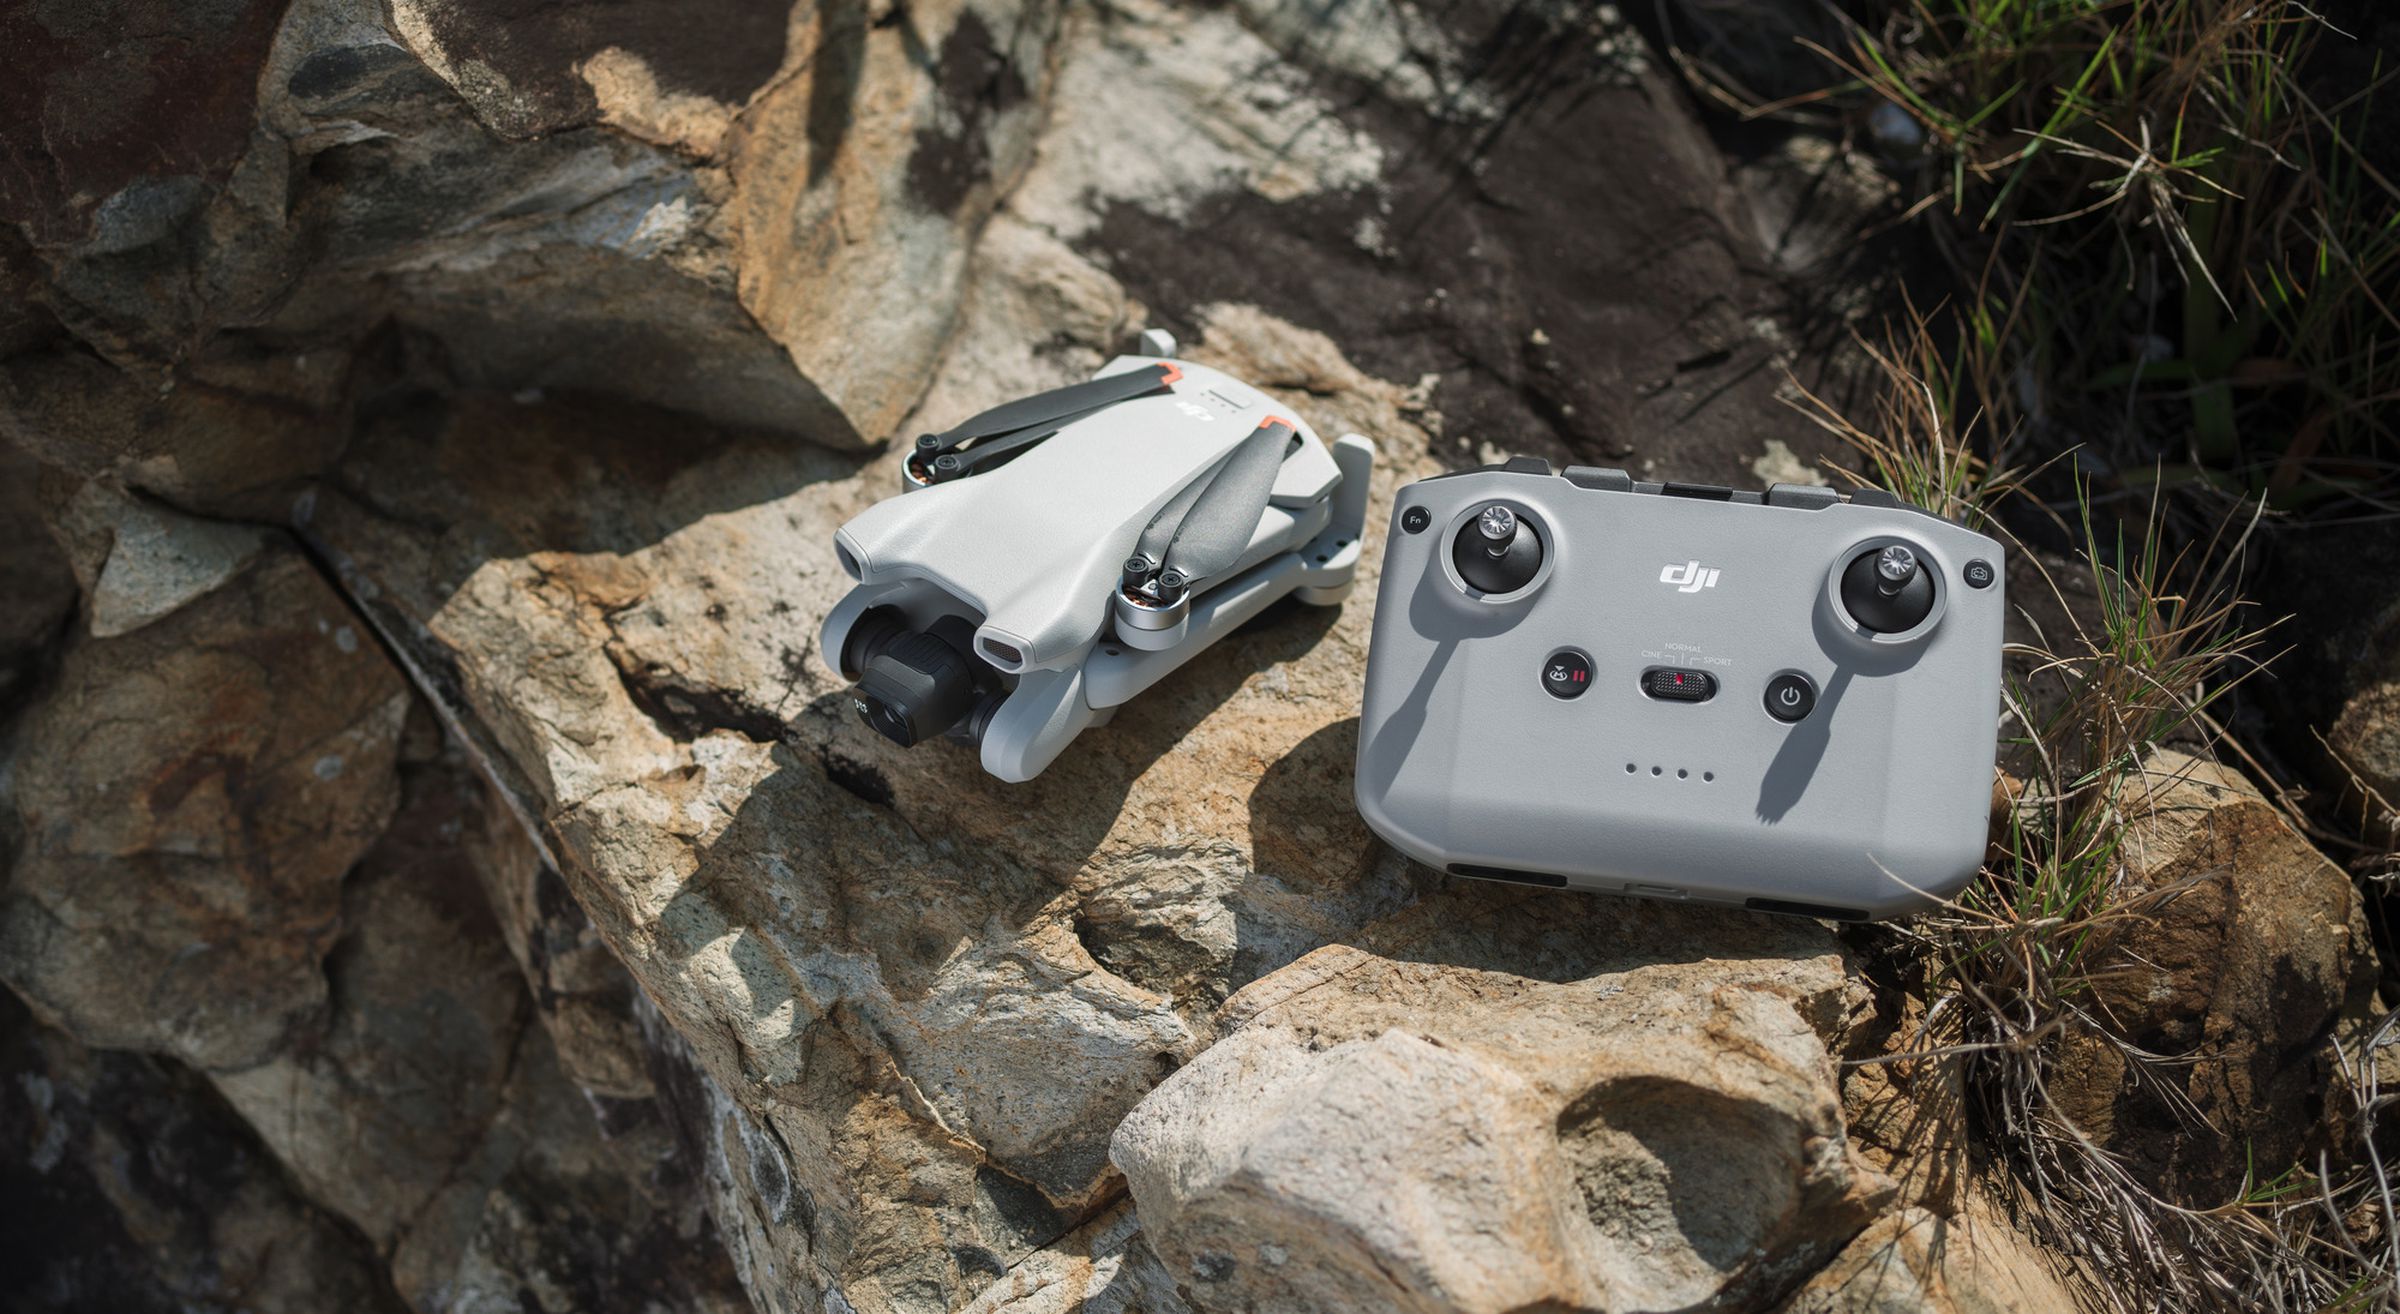 The DJI Mini 3 drone without extended blades next to the DJI RC-N1 controller.  Both products rest on a large rock in an outdoor setting.